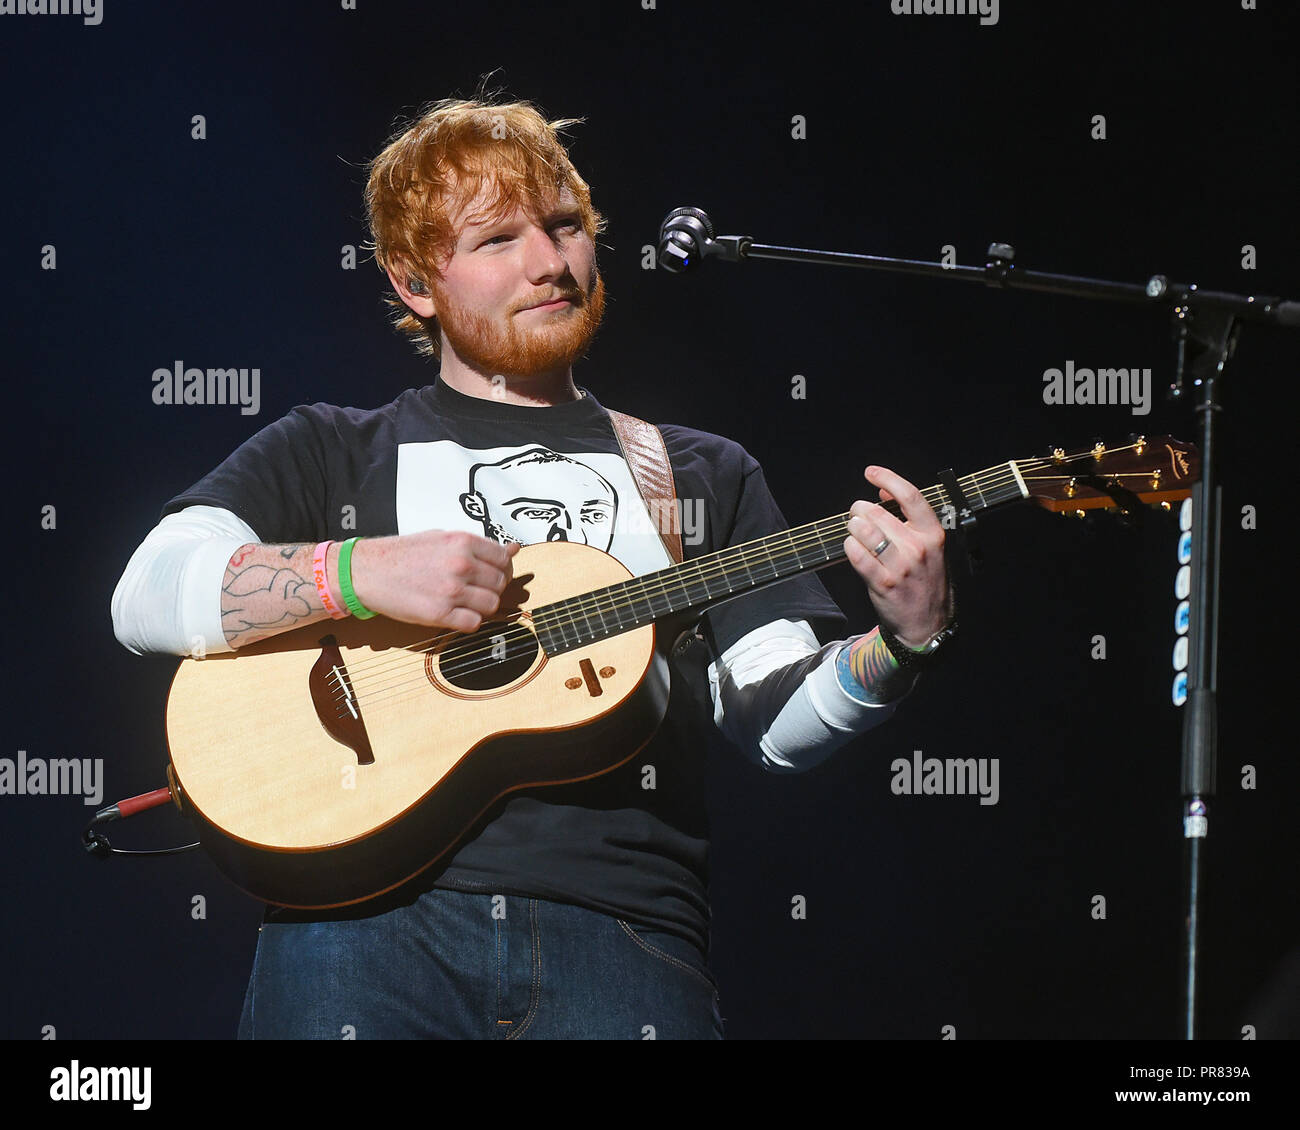 Pittsburgh, PA, USA. 29th Sep, 2018. 29 September 2018 - Pittsburgh,  Pennsylvania - Pop music star, ED SHEERAN, pays tribute to Pittsburgh  rapper MAC MILLER by wearing a t-shirt with his depicting